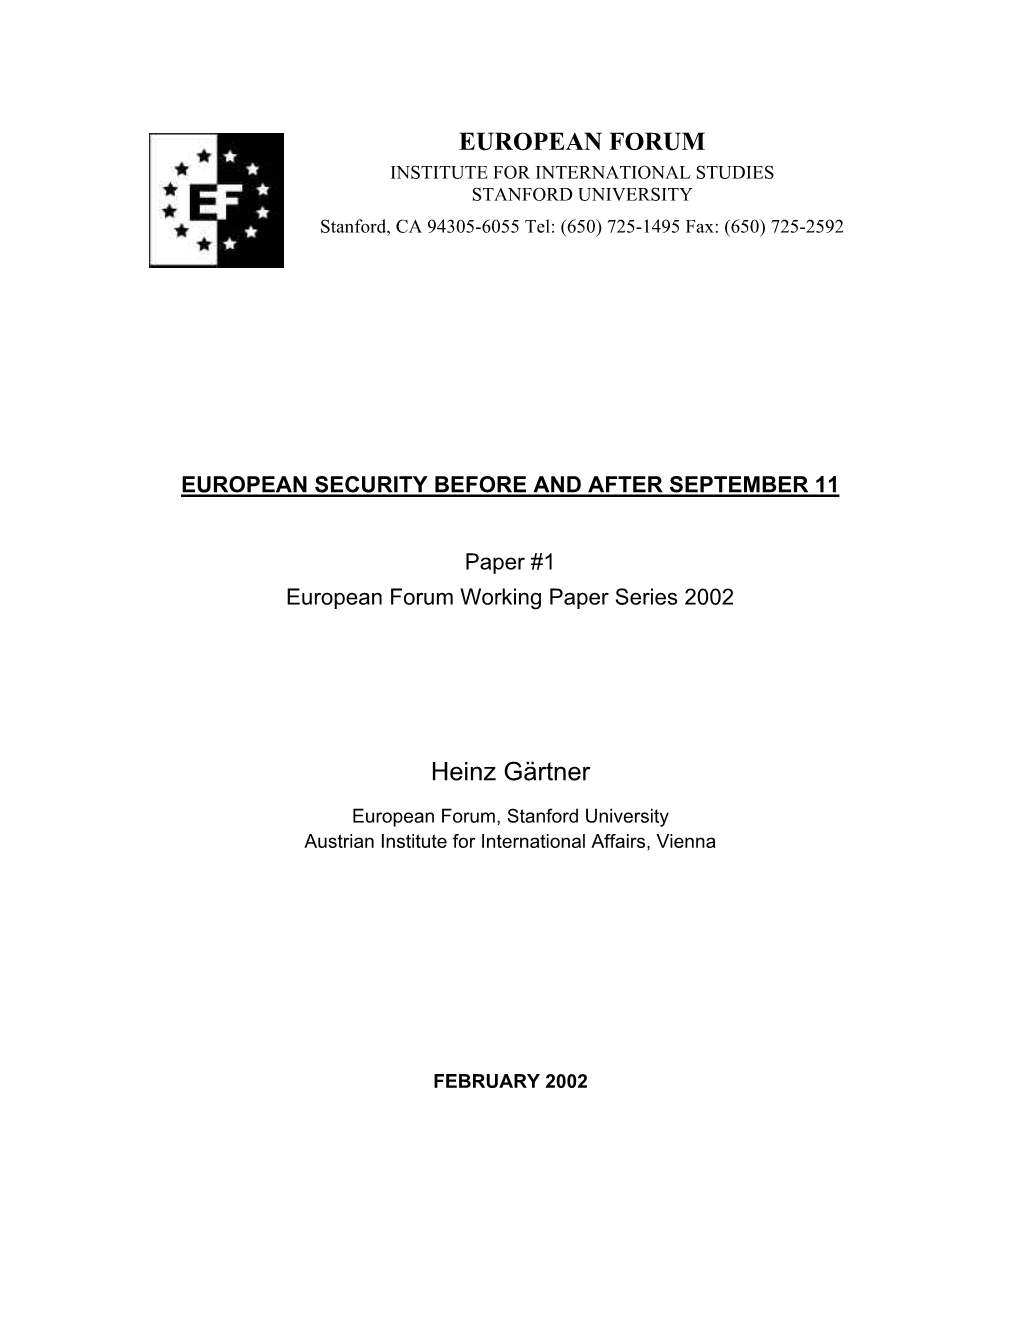 European Security Before and After September 11